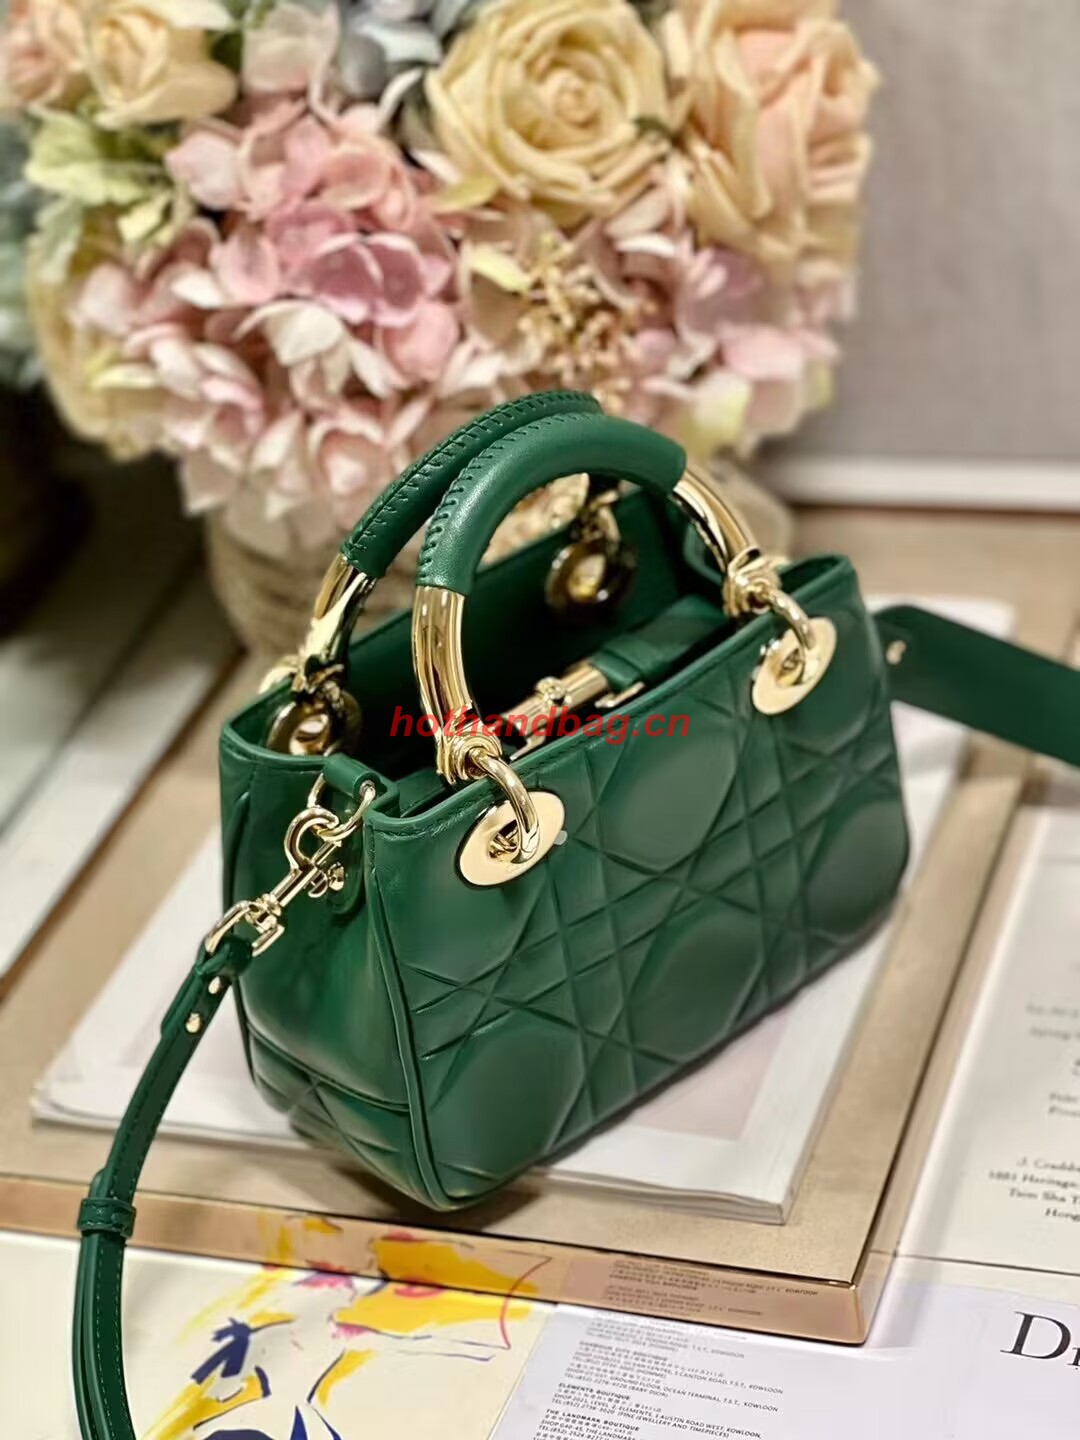 LADY DIOR TOP HANDLE SMALL BAG Cannage Lambskin C0620 green